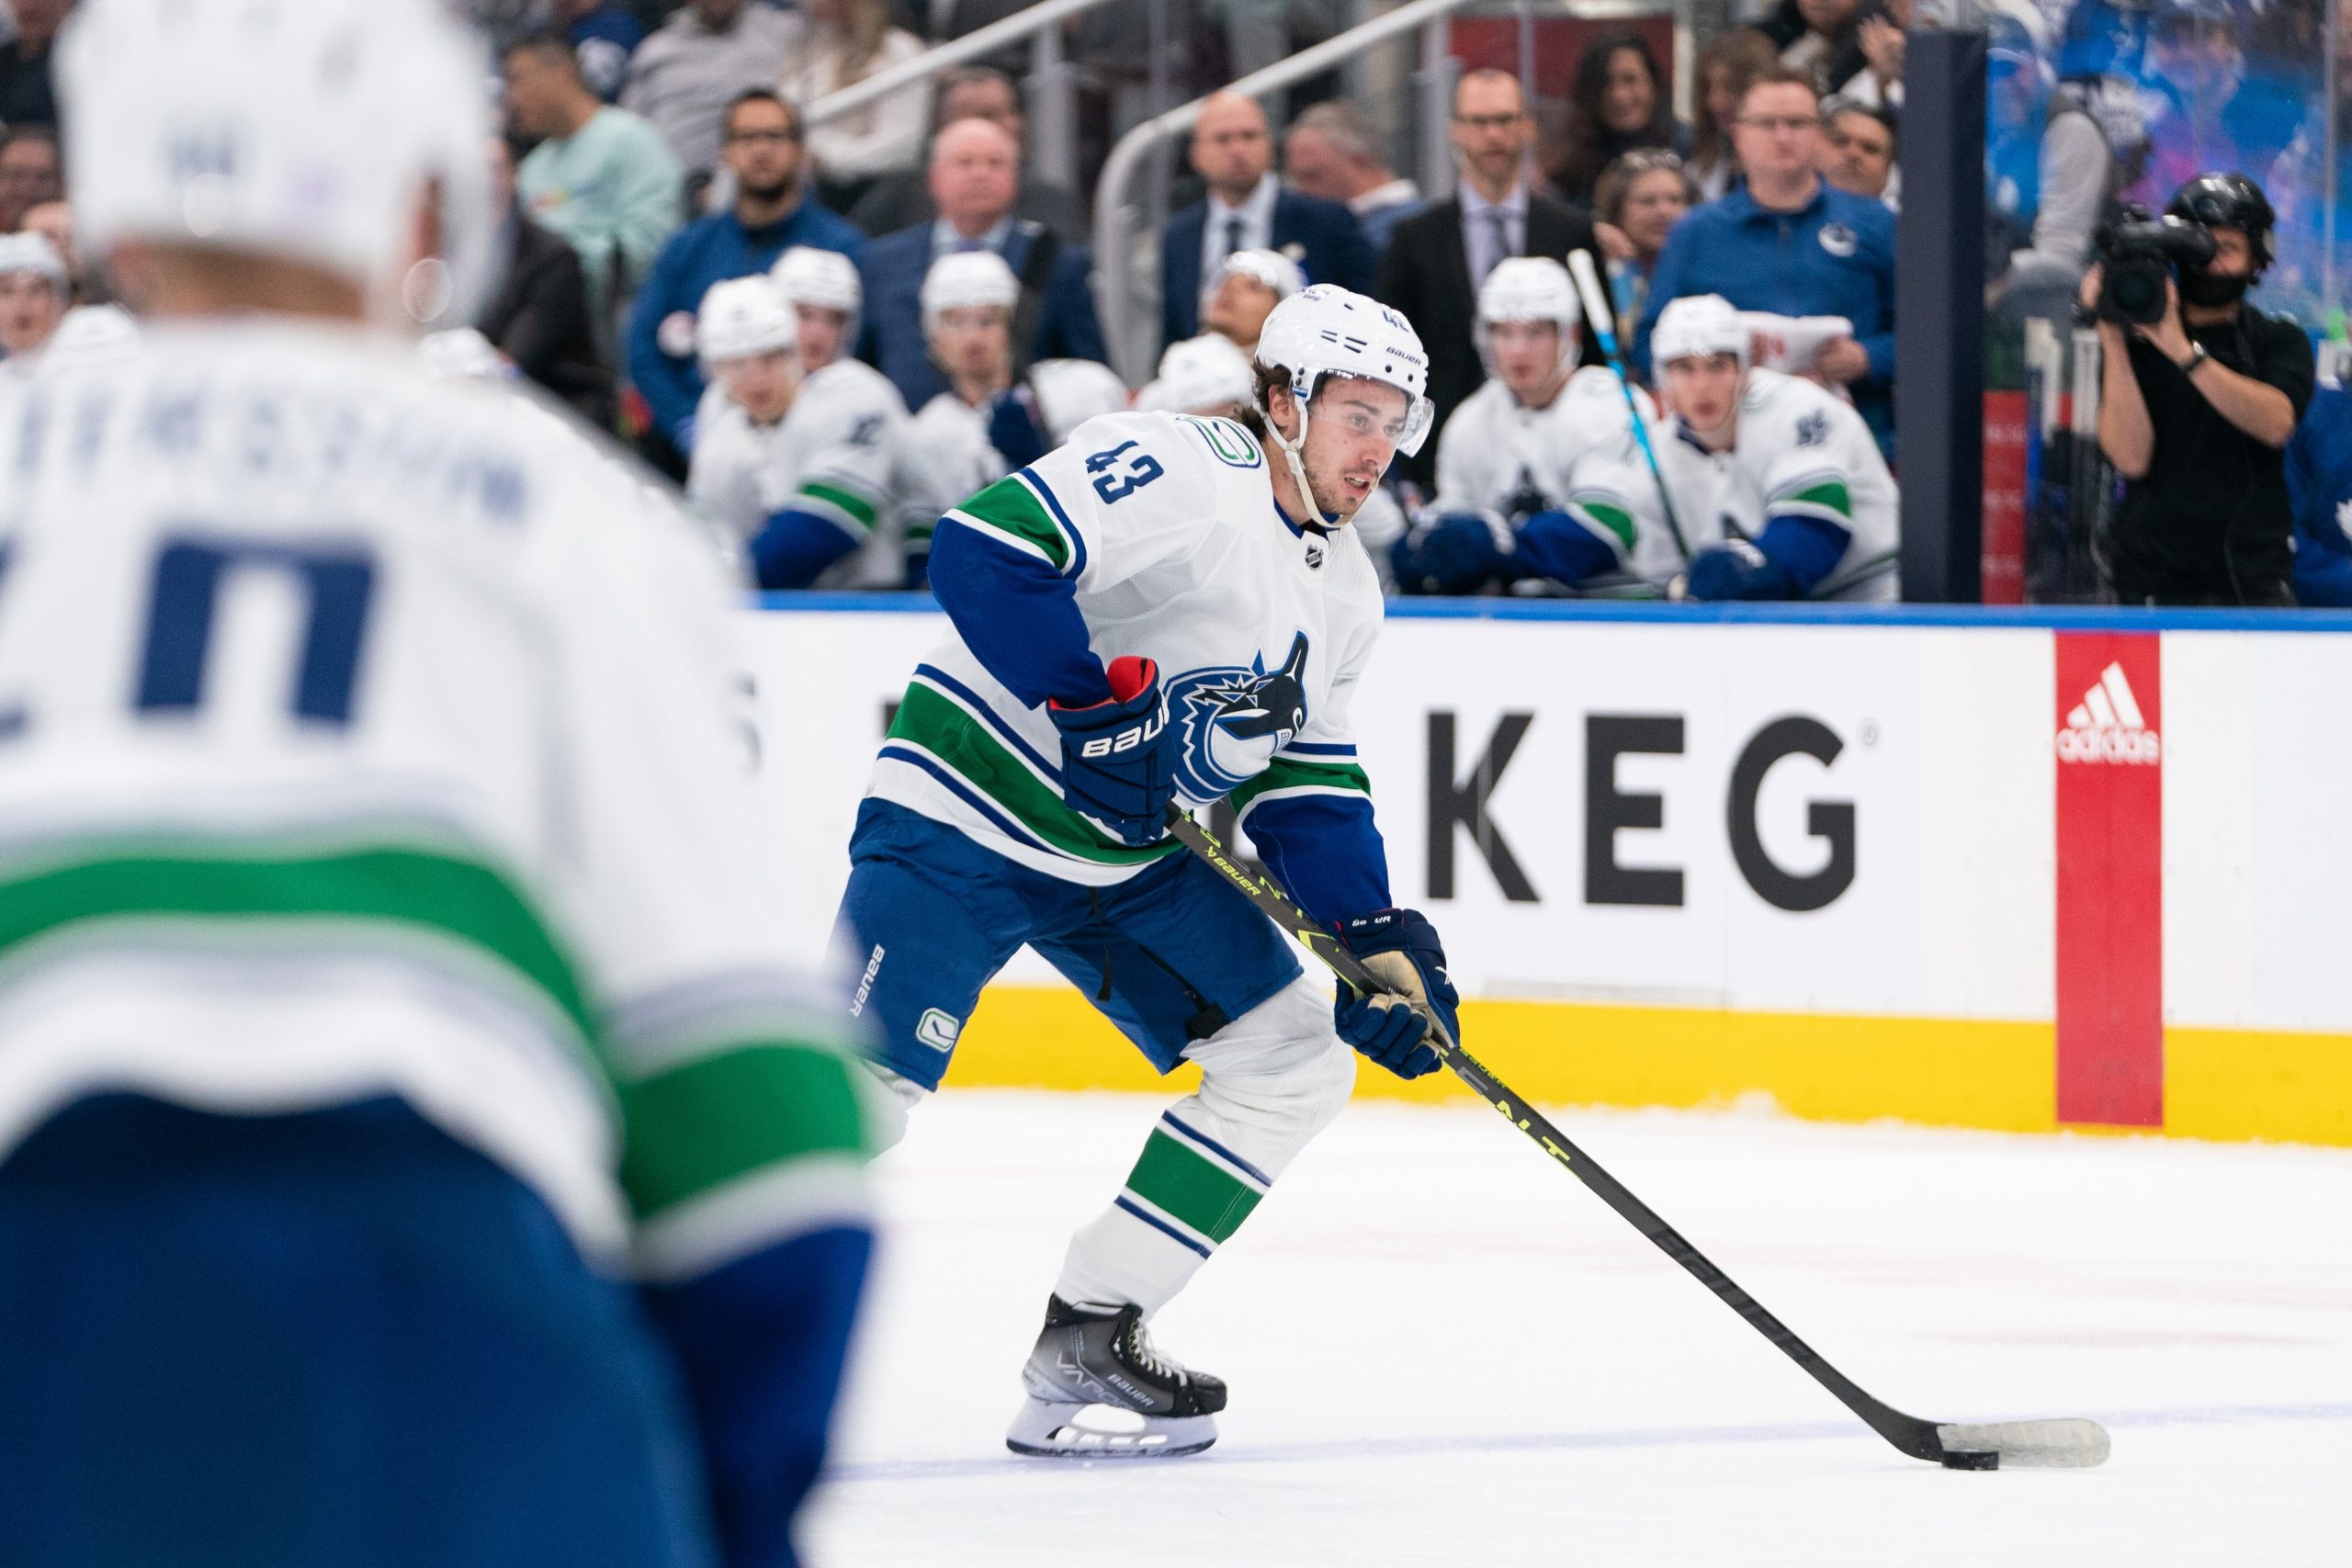 Vancouver Canucks: The Inception of the Boston Model